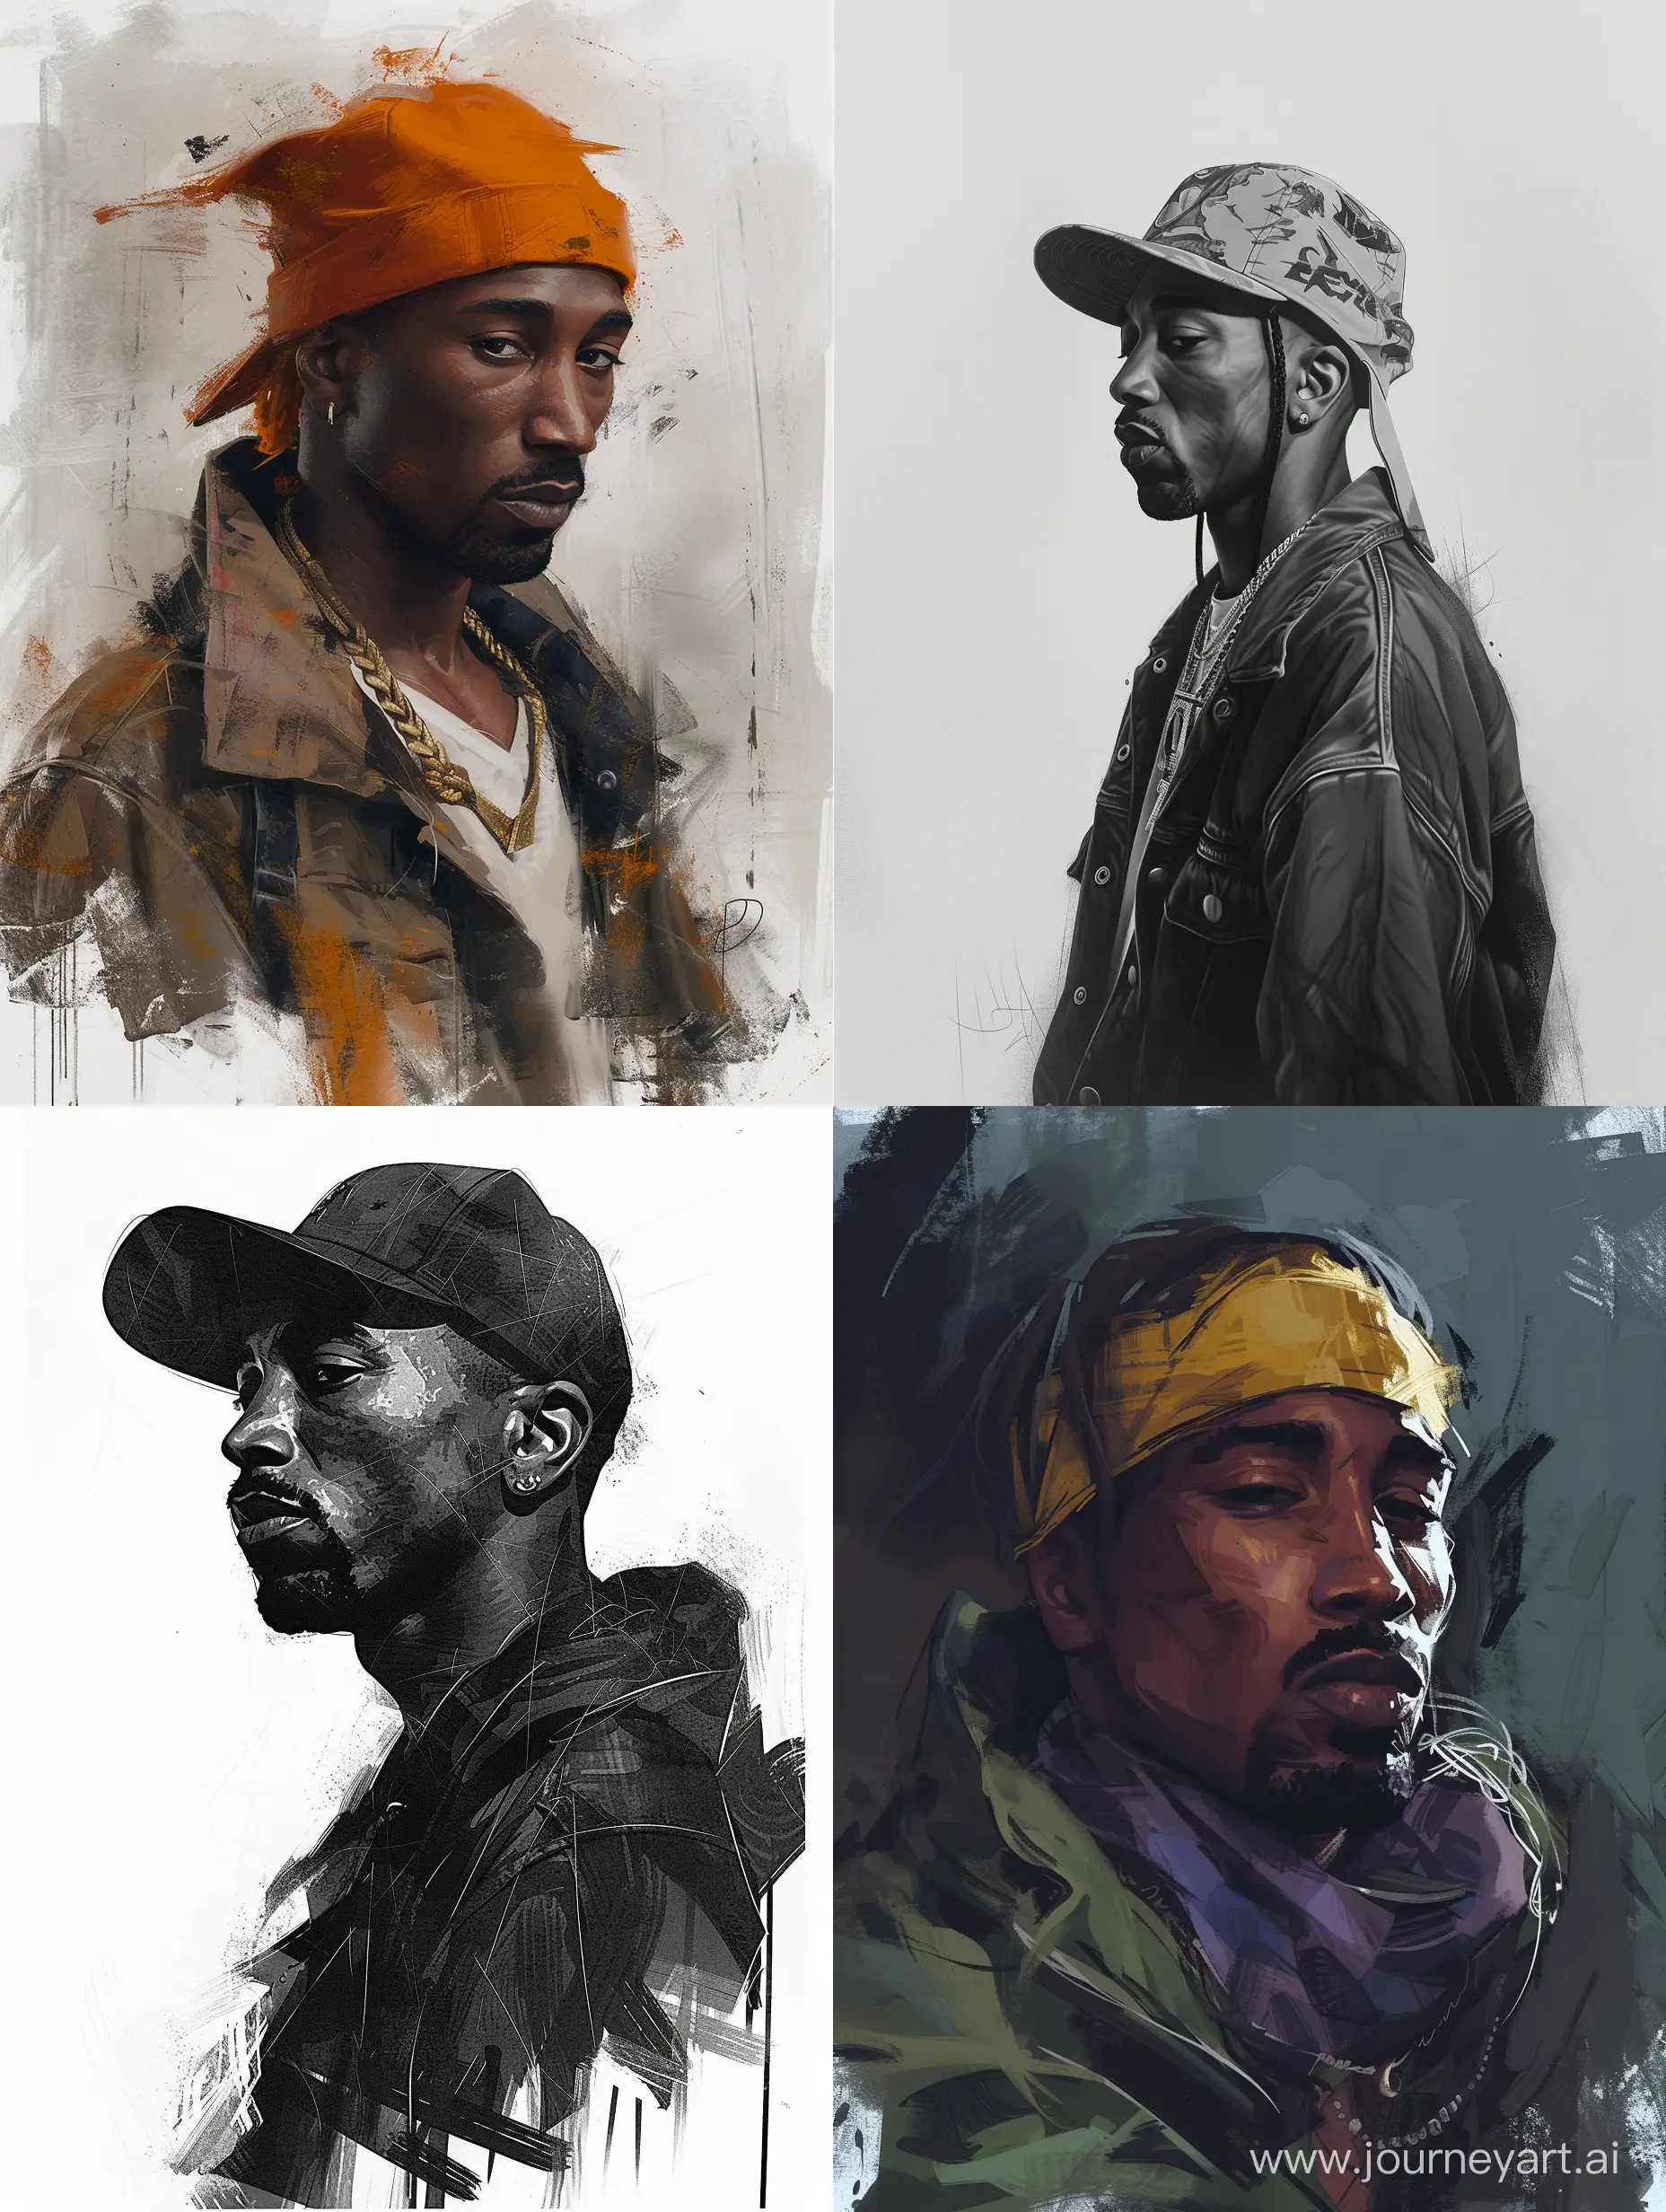 Tupac shakur in the art style